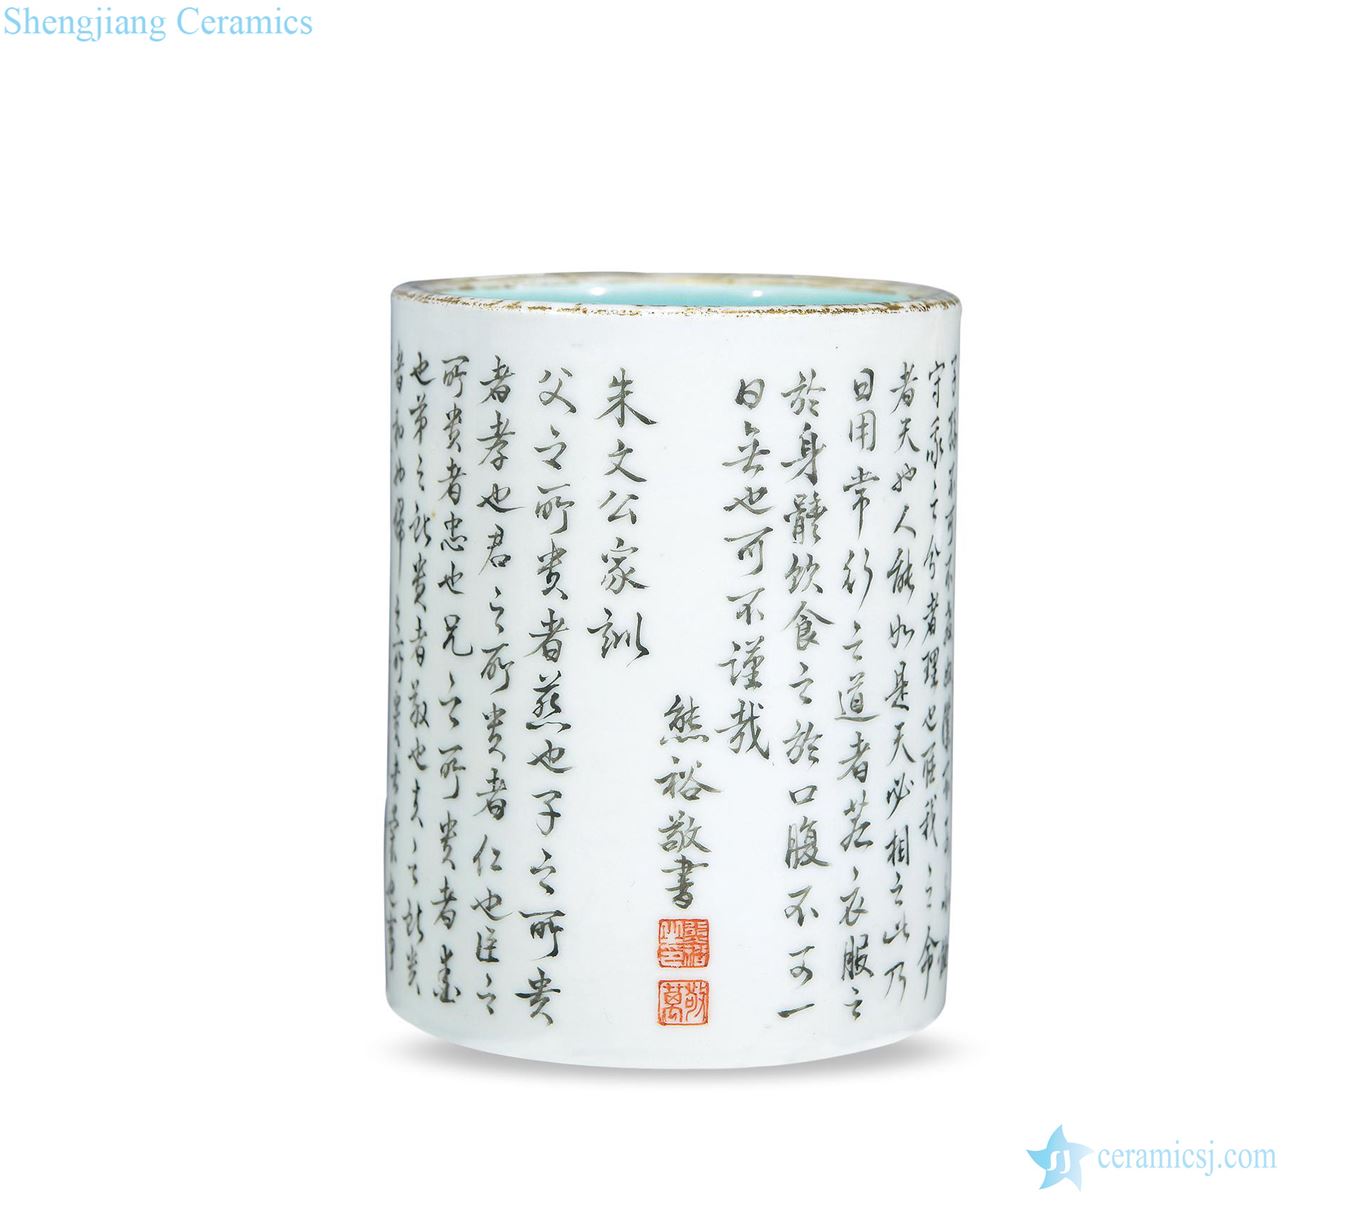 Zhuxi's family precepts qing qianlong ink in the pen container